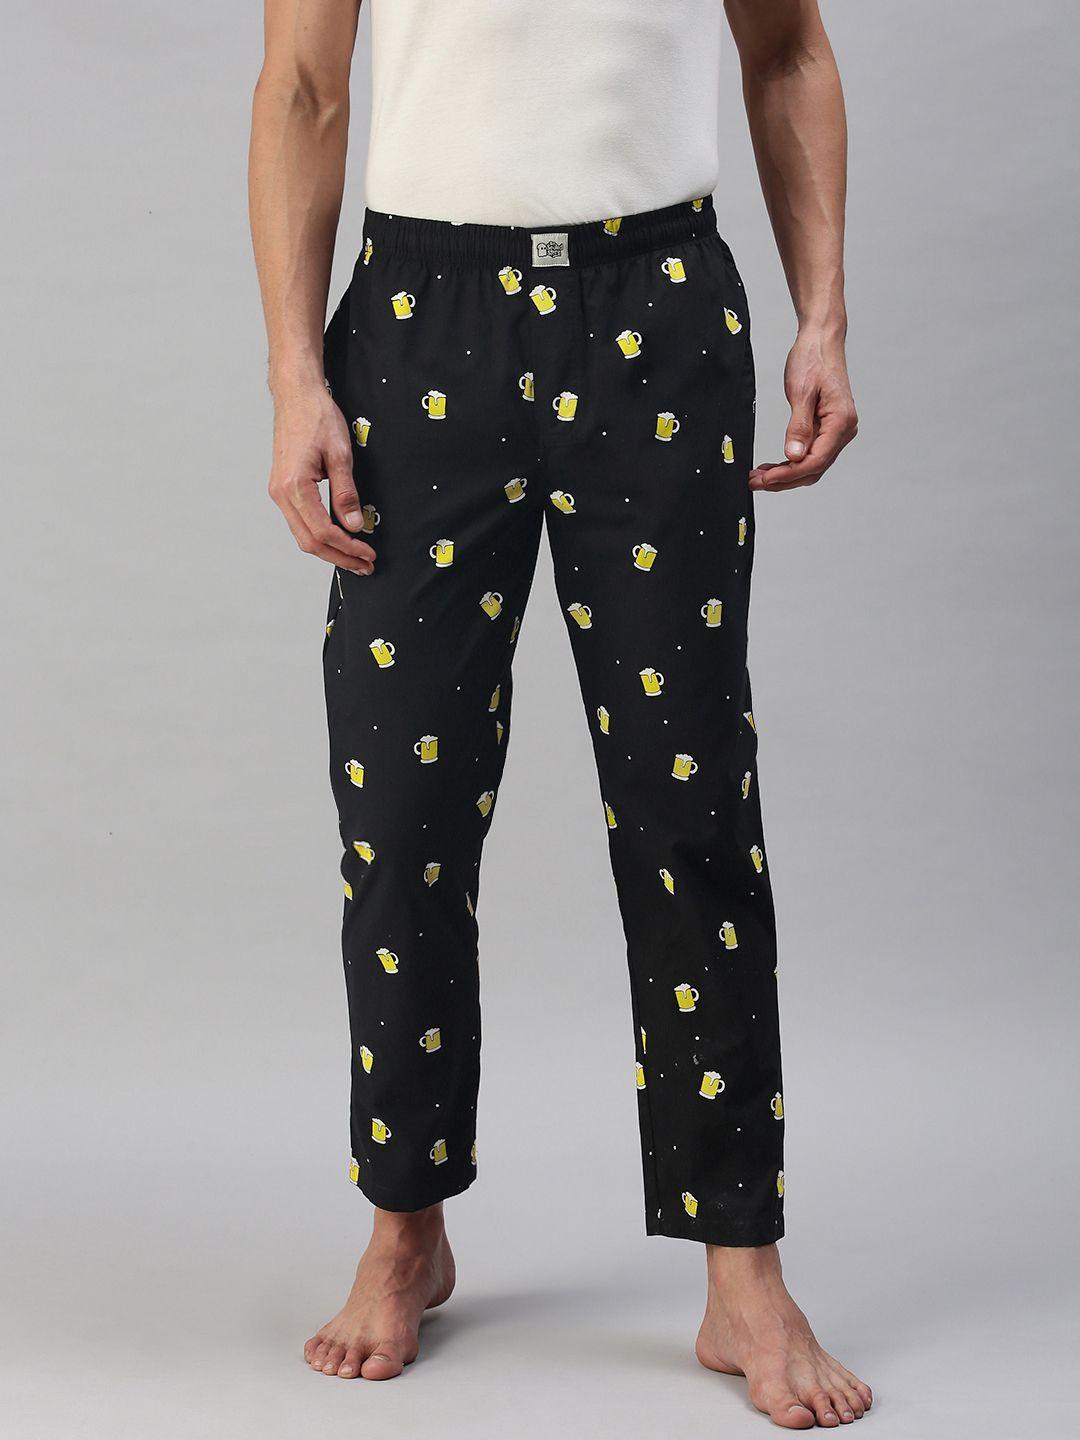 the souled store men black pure cotton beer printed lounge pants